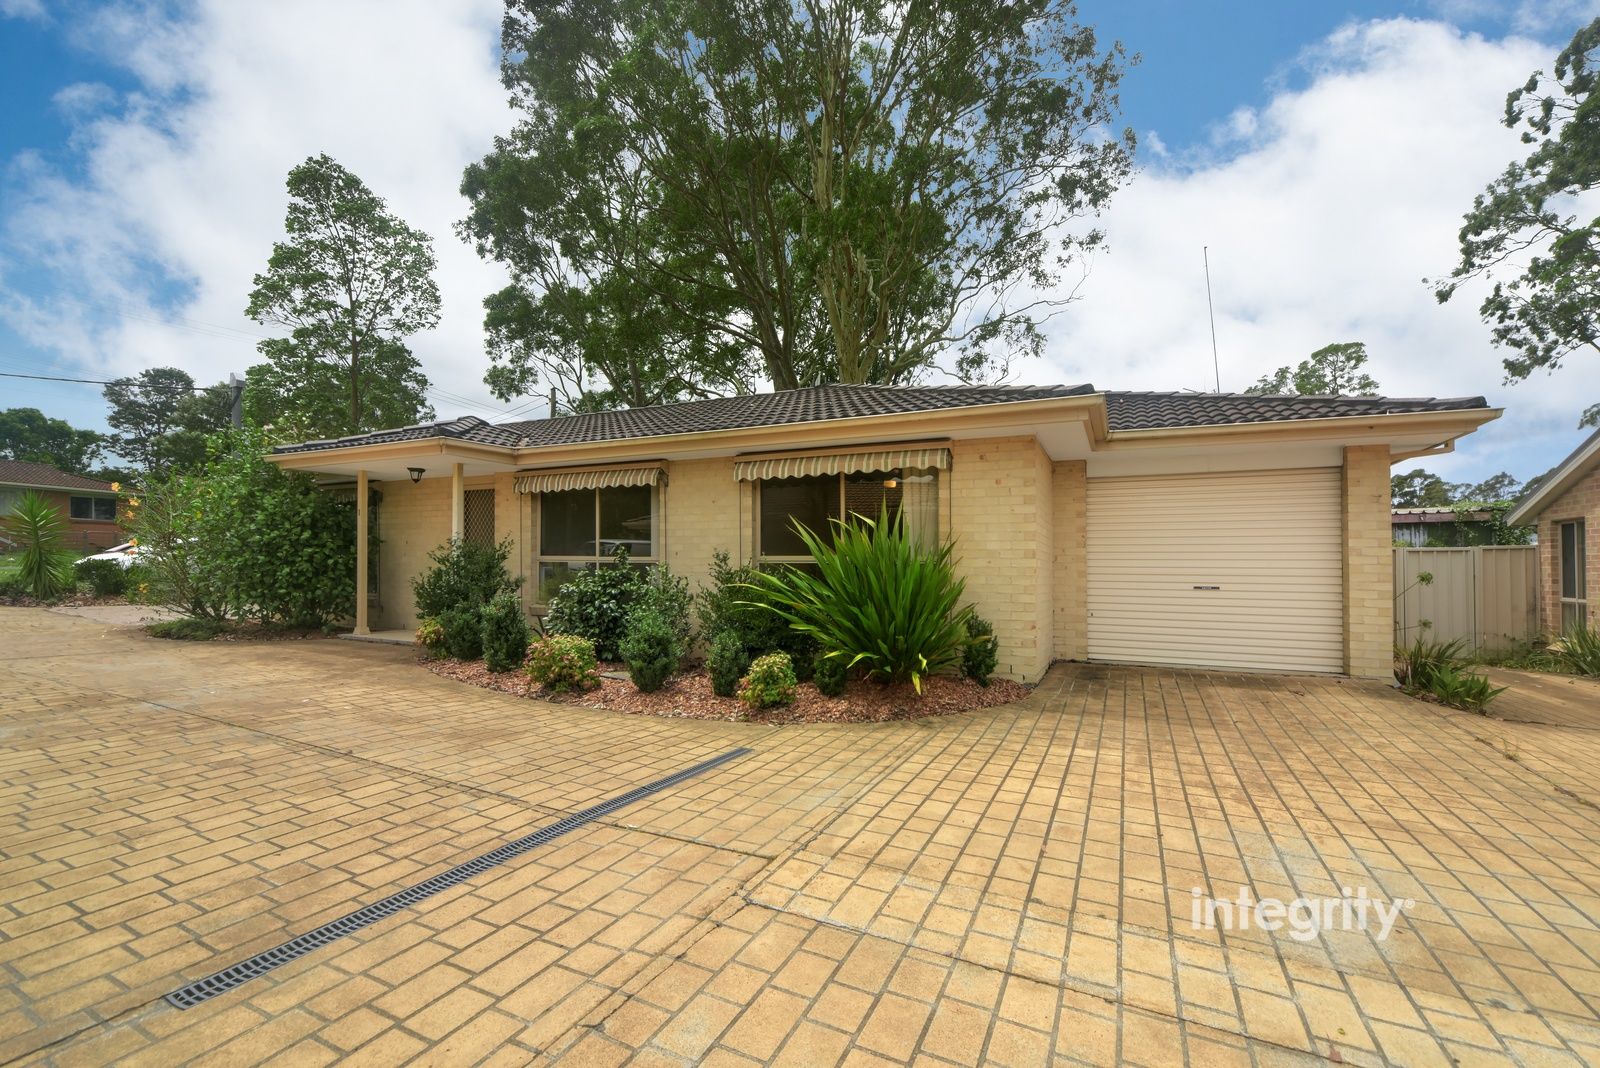 3 bedrooms Villa in 1/76 Hillcrest Avenue SOUTH NOWRA NSW, 2541